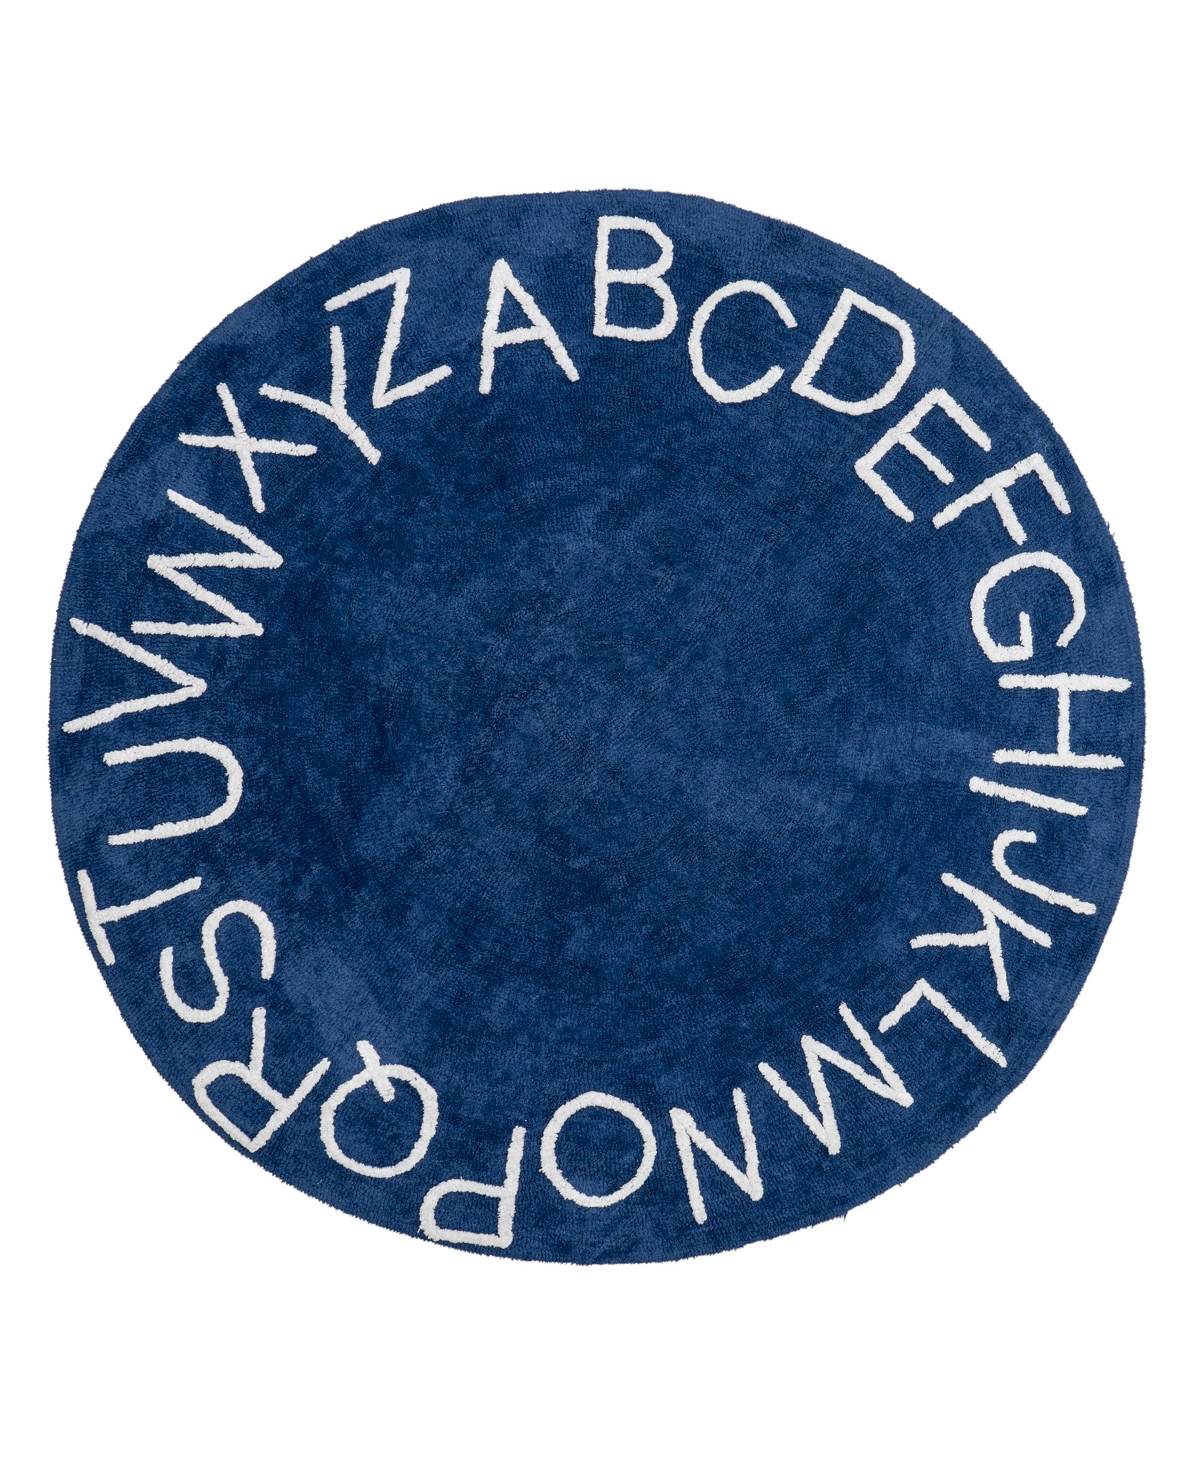 Nuloom Discovery Kids Washable Alphabet 4' X 4' Round Area Rug In Navy